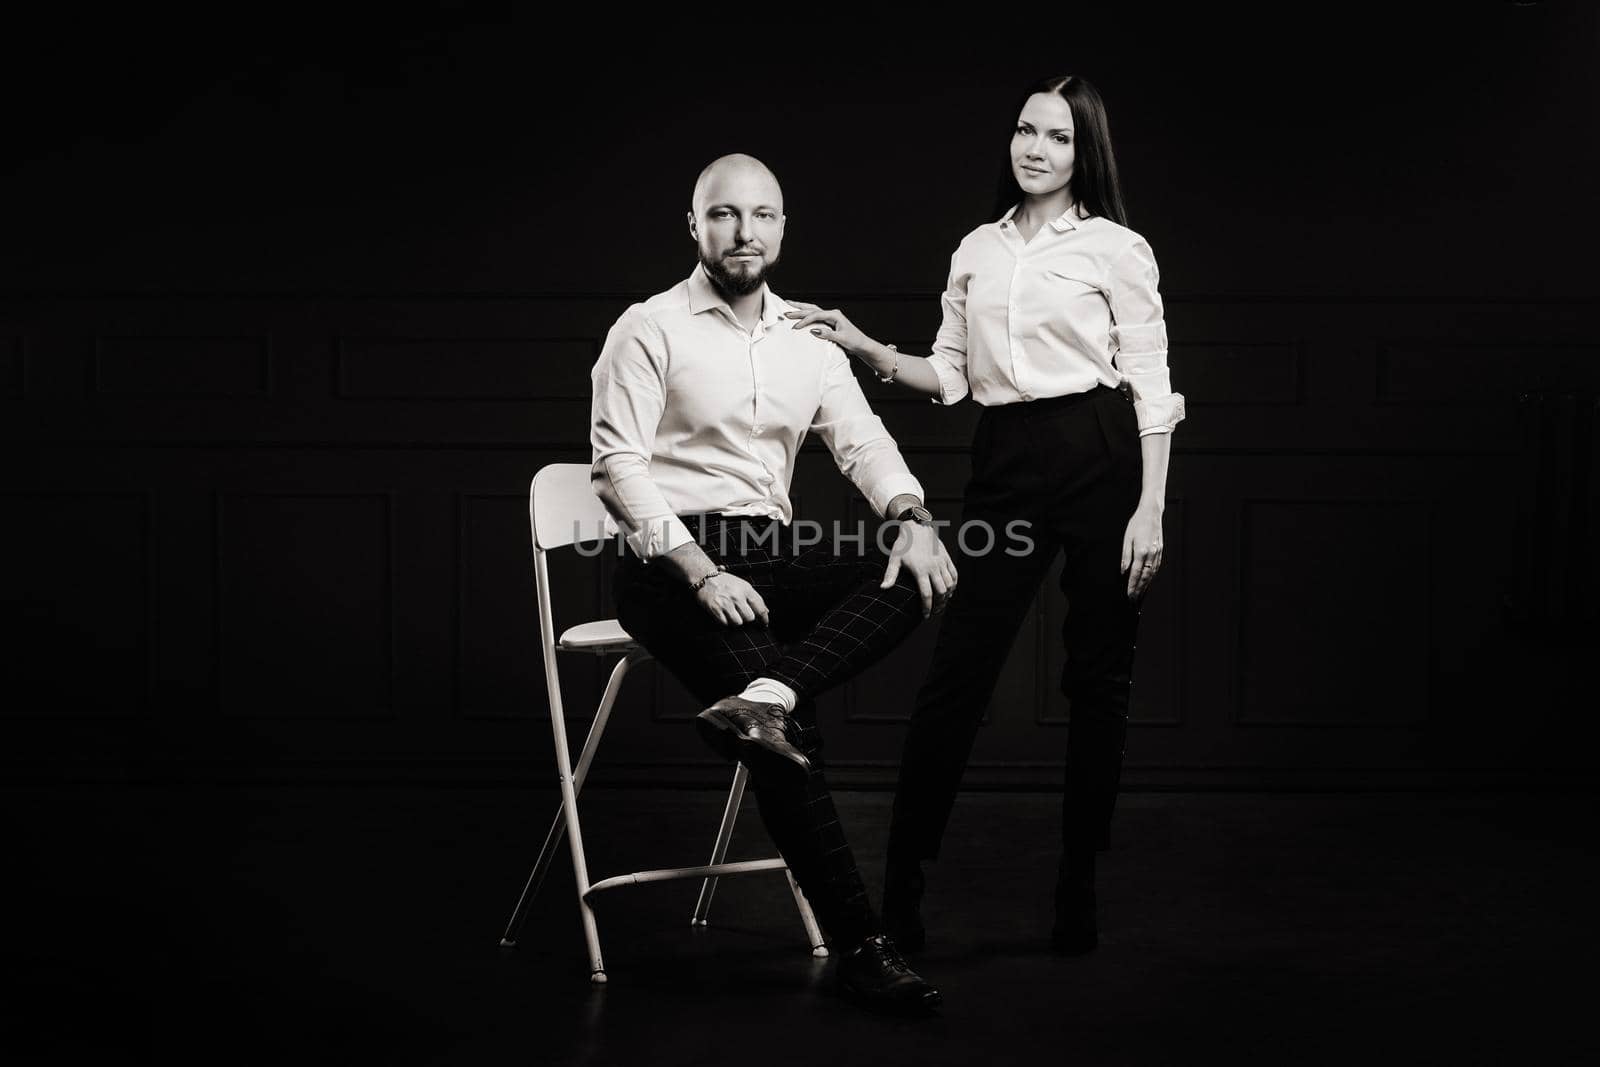 A man and a woman in white shirts on a black background.A couple in love in the studio interior.black and white photo.